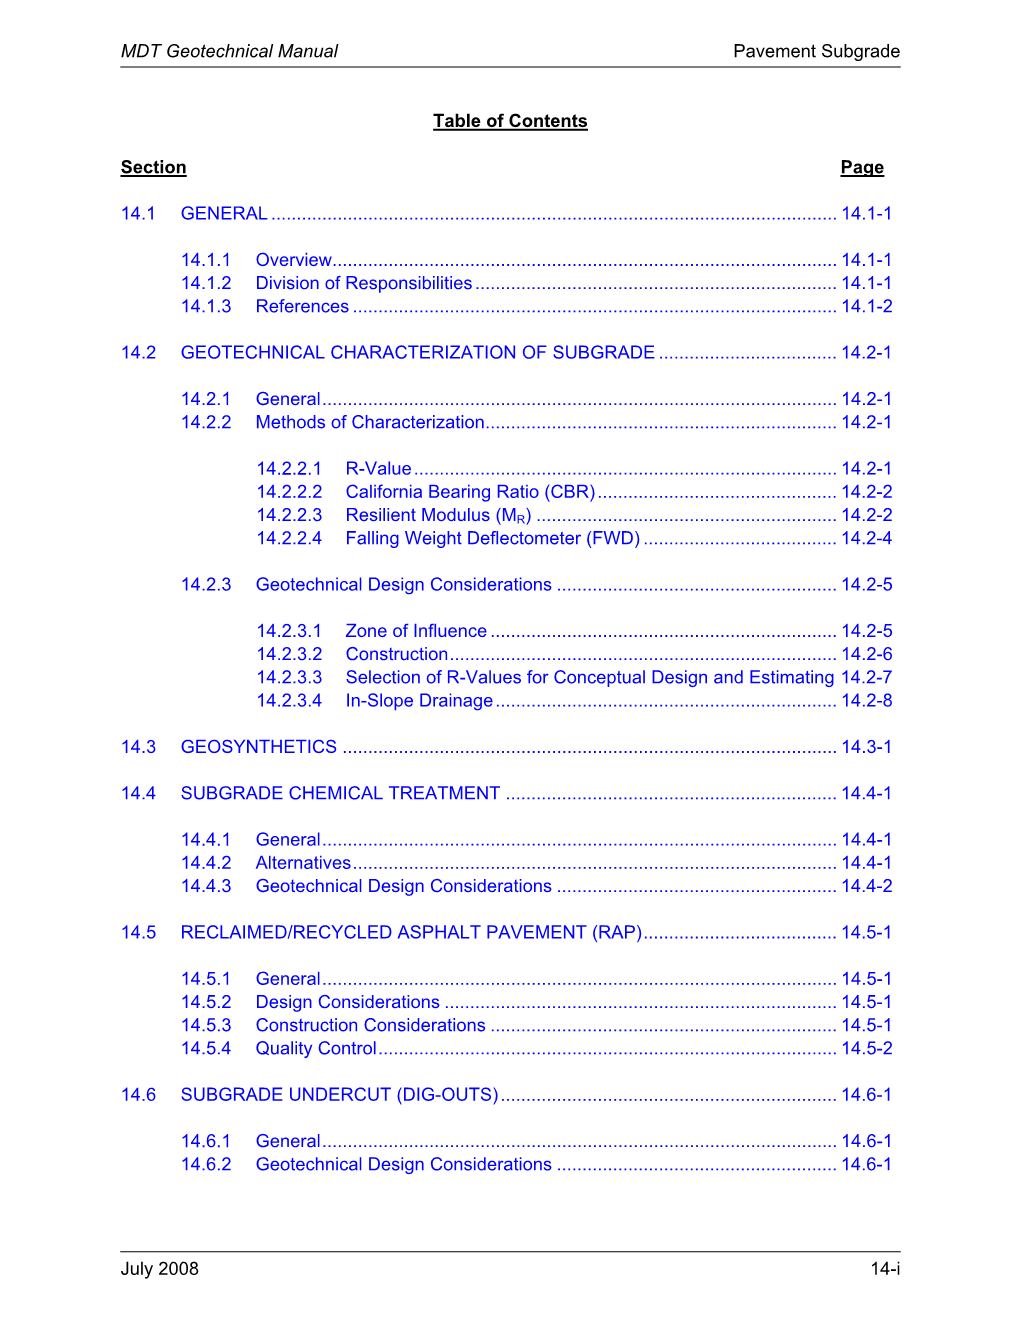 MDT Geotechnical Manual Pavement Subgrade July 2008 14-I Table Of